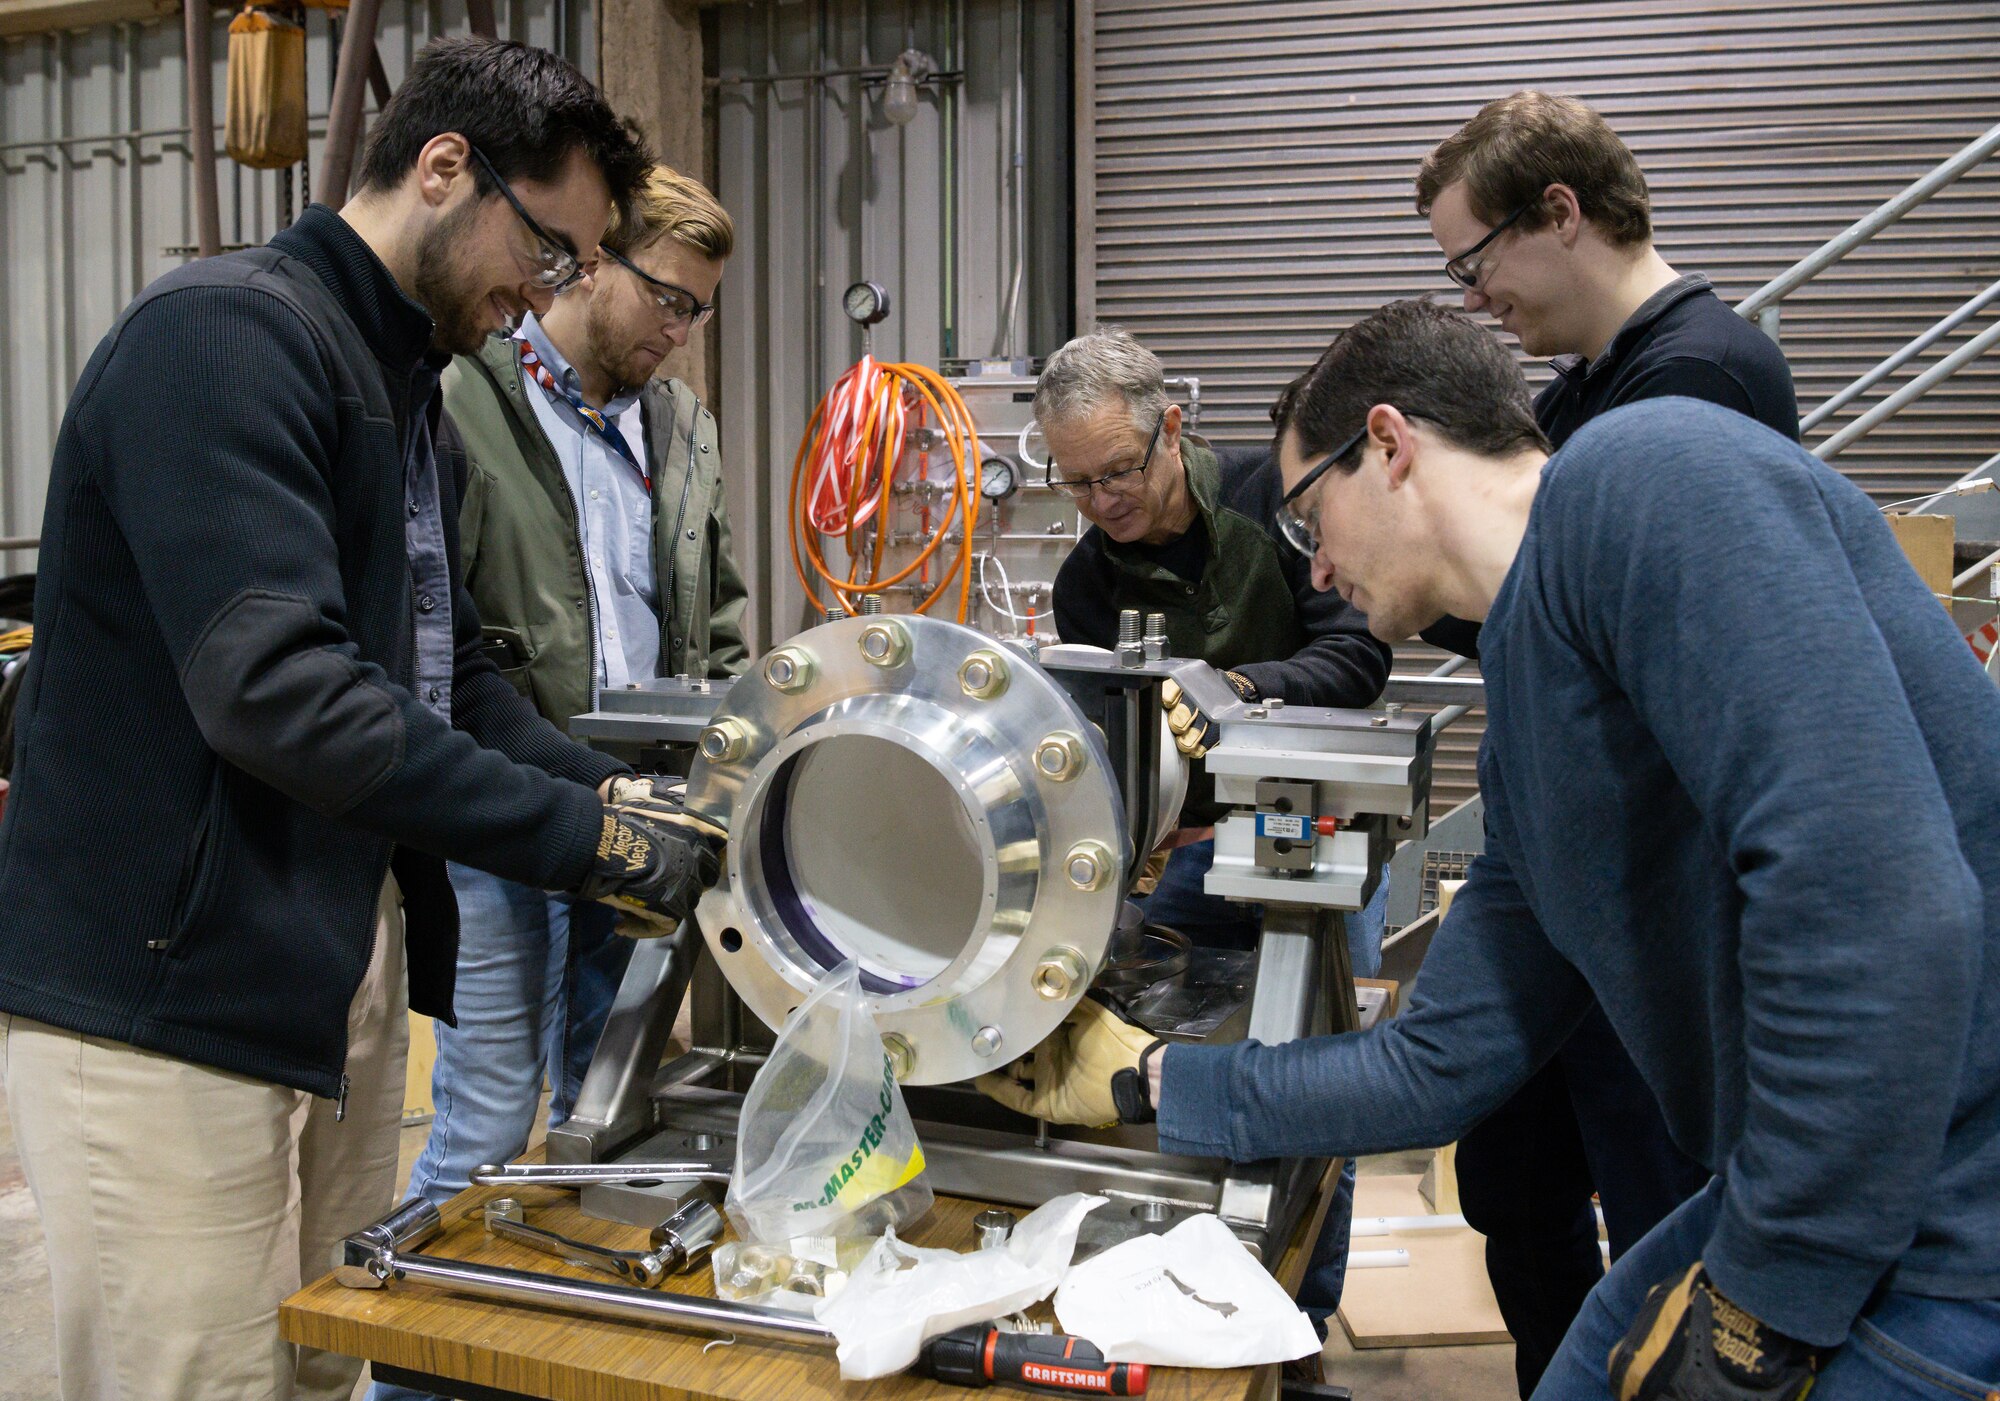 AEDC team members and an engineer with small business Core Parts bolt a flange into place while assembling an instrumented small engine test stand, March 9, 2022, in the Propulsion Research Facility at the University of Tennessee Space Institute.